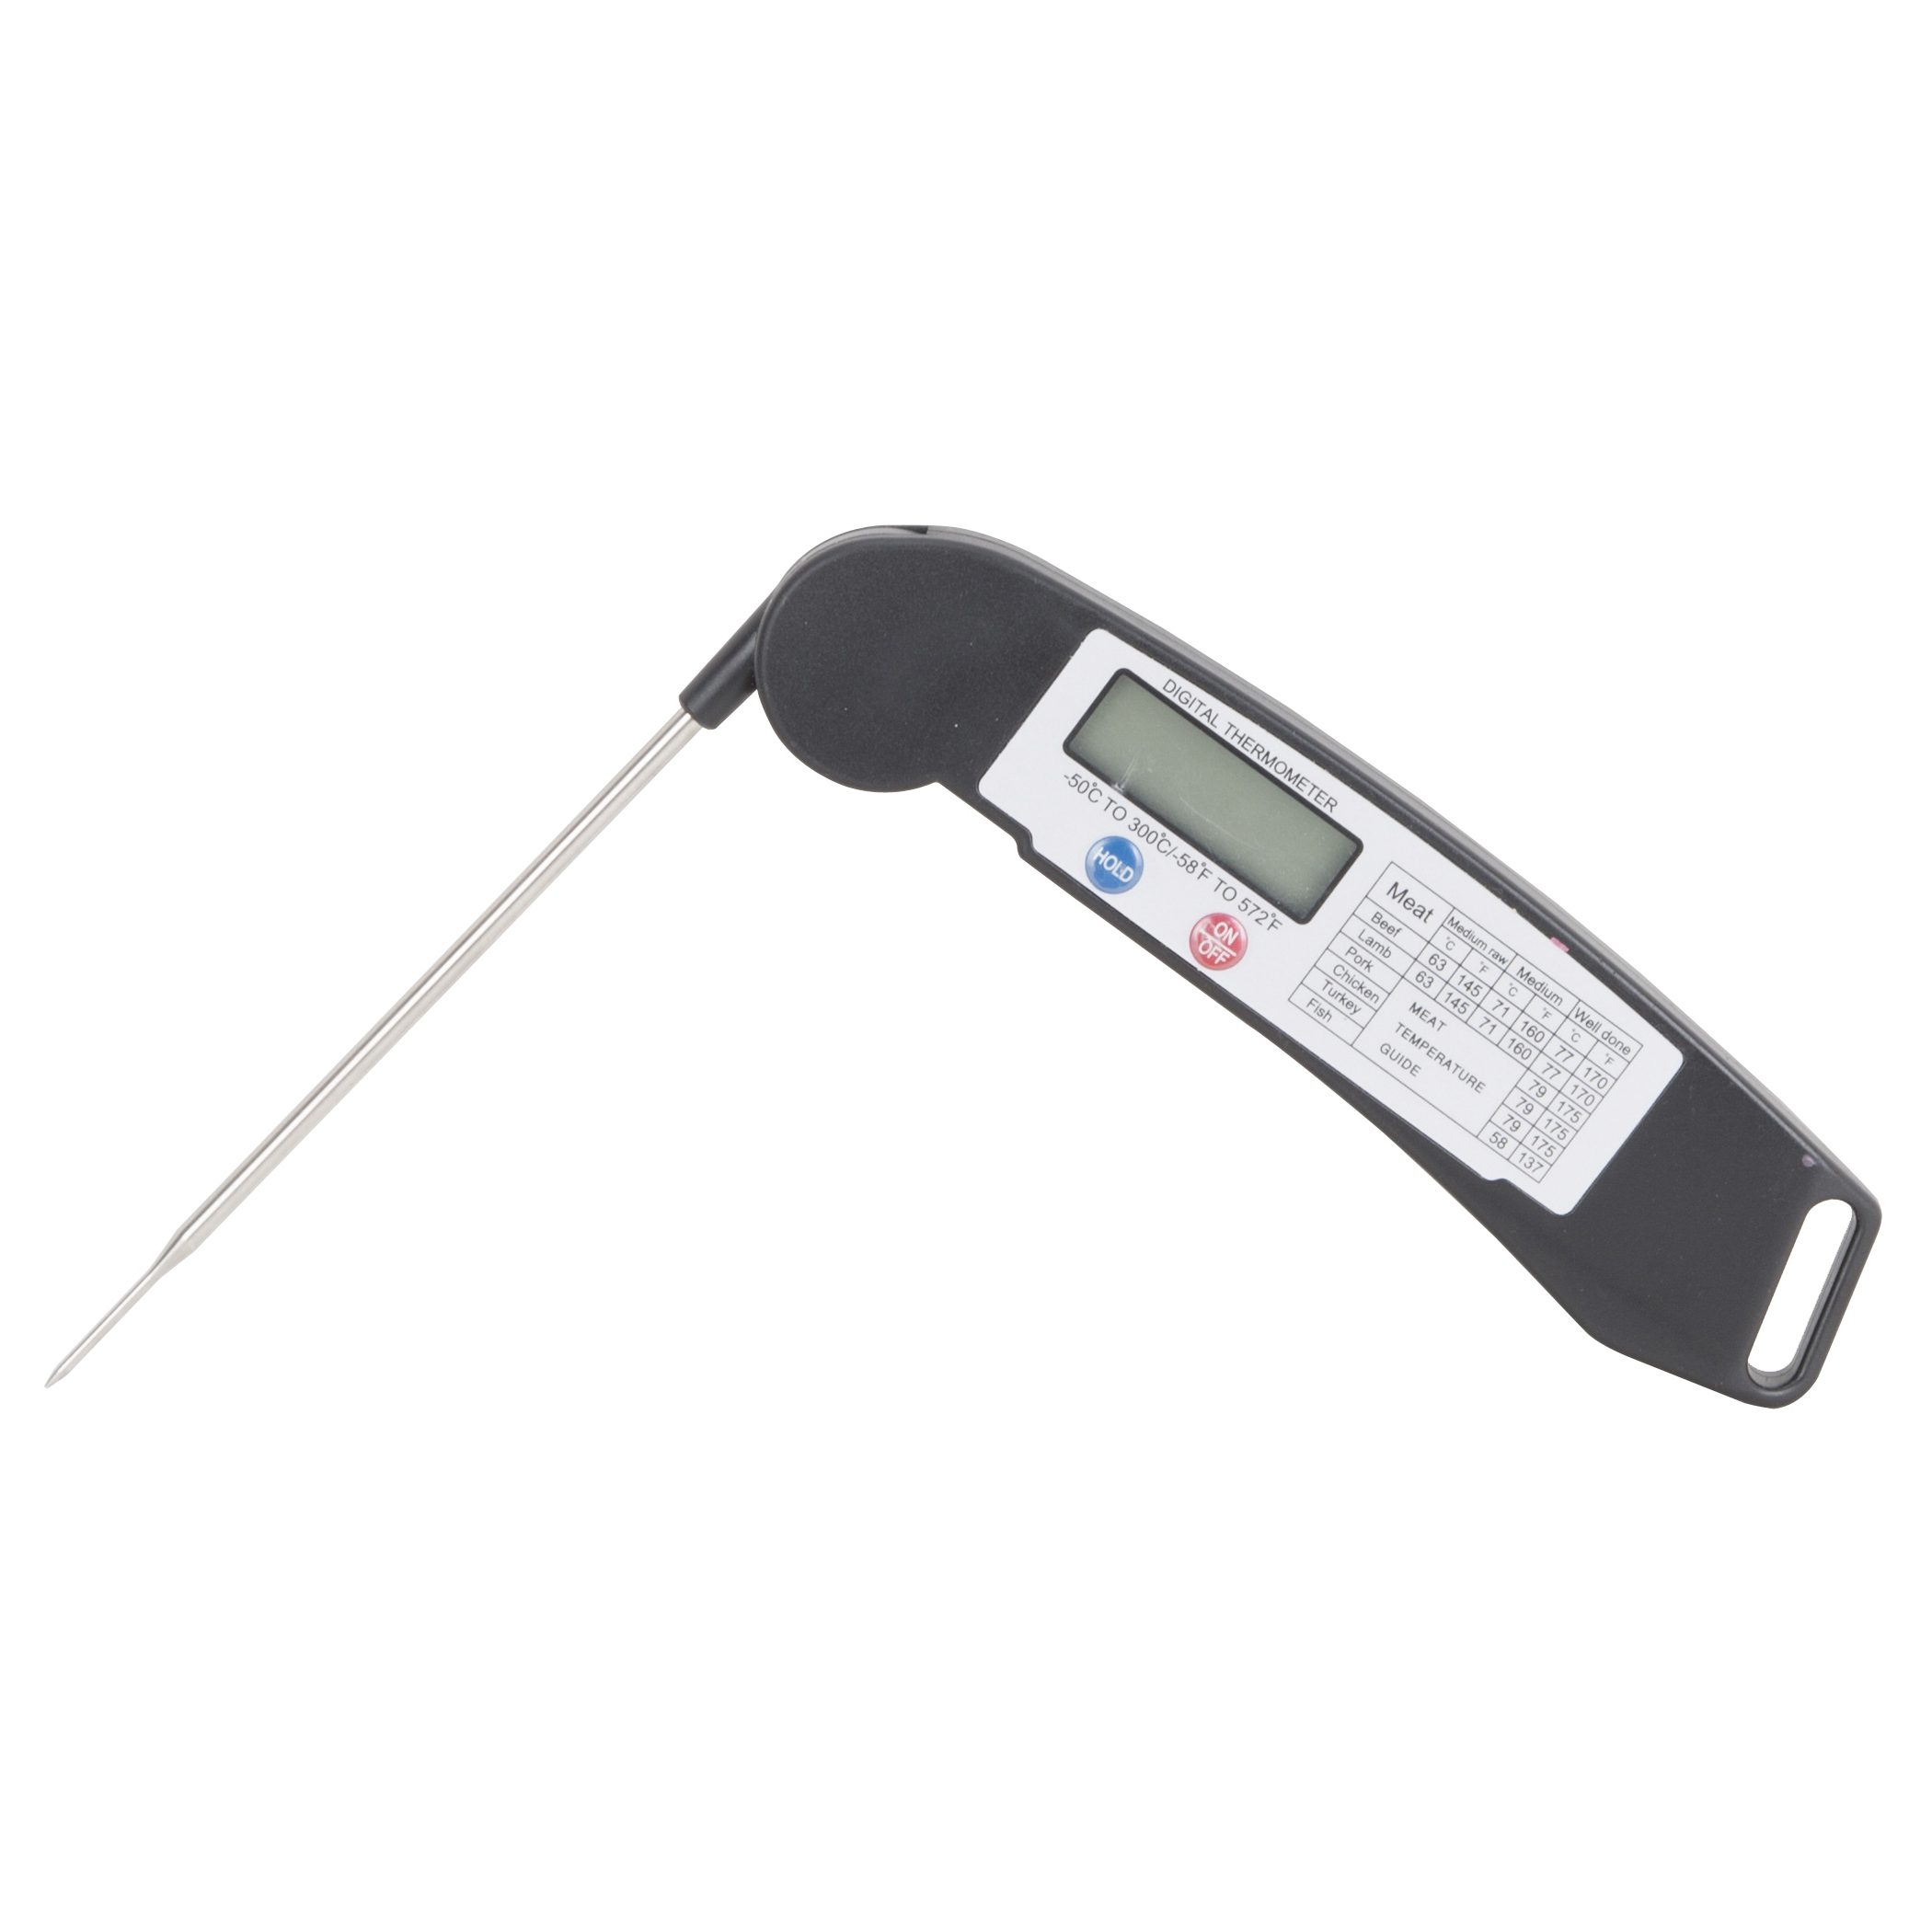 Thermometer, 1/8 in W Blade, Stainless Steel Blade, Plastic case, Stainless Steel Probe Needle, 6 in OAL